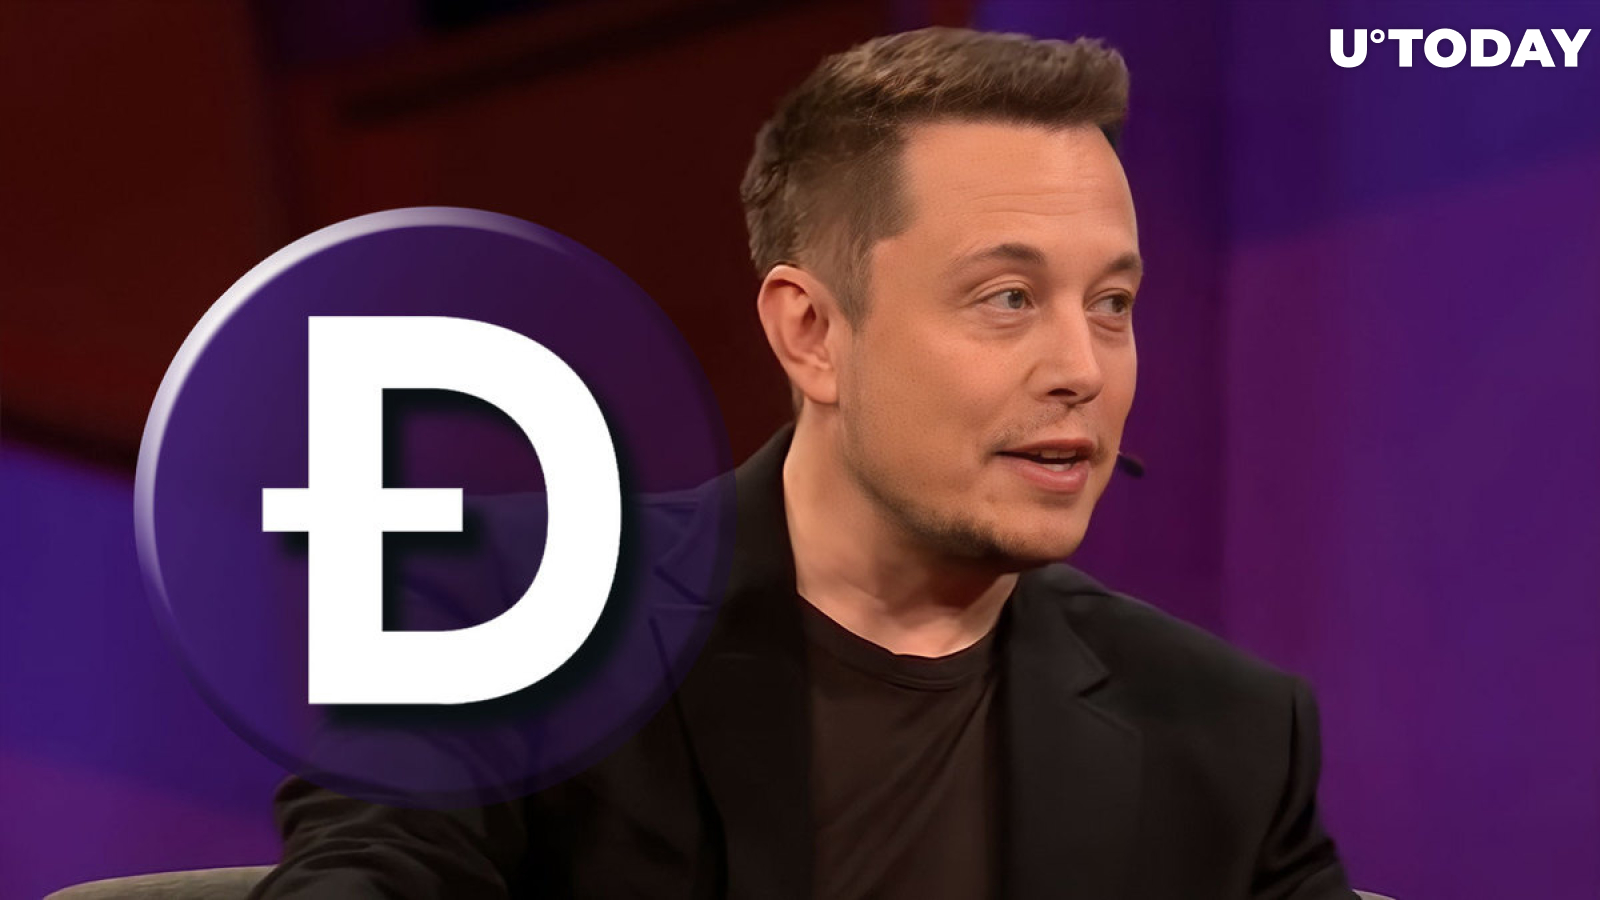 Elon Musk Makes New Move on Twitter, Dogecoin (DOGE) Founder Fails to Catch Up